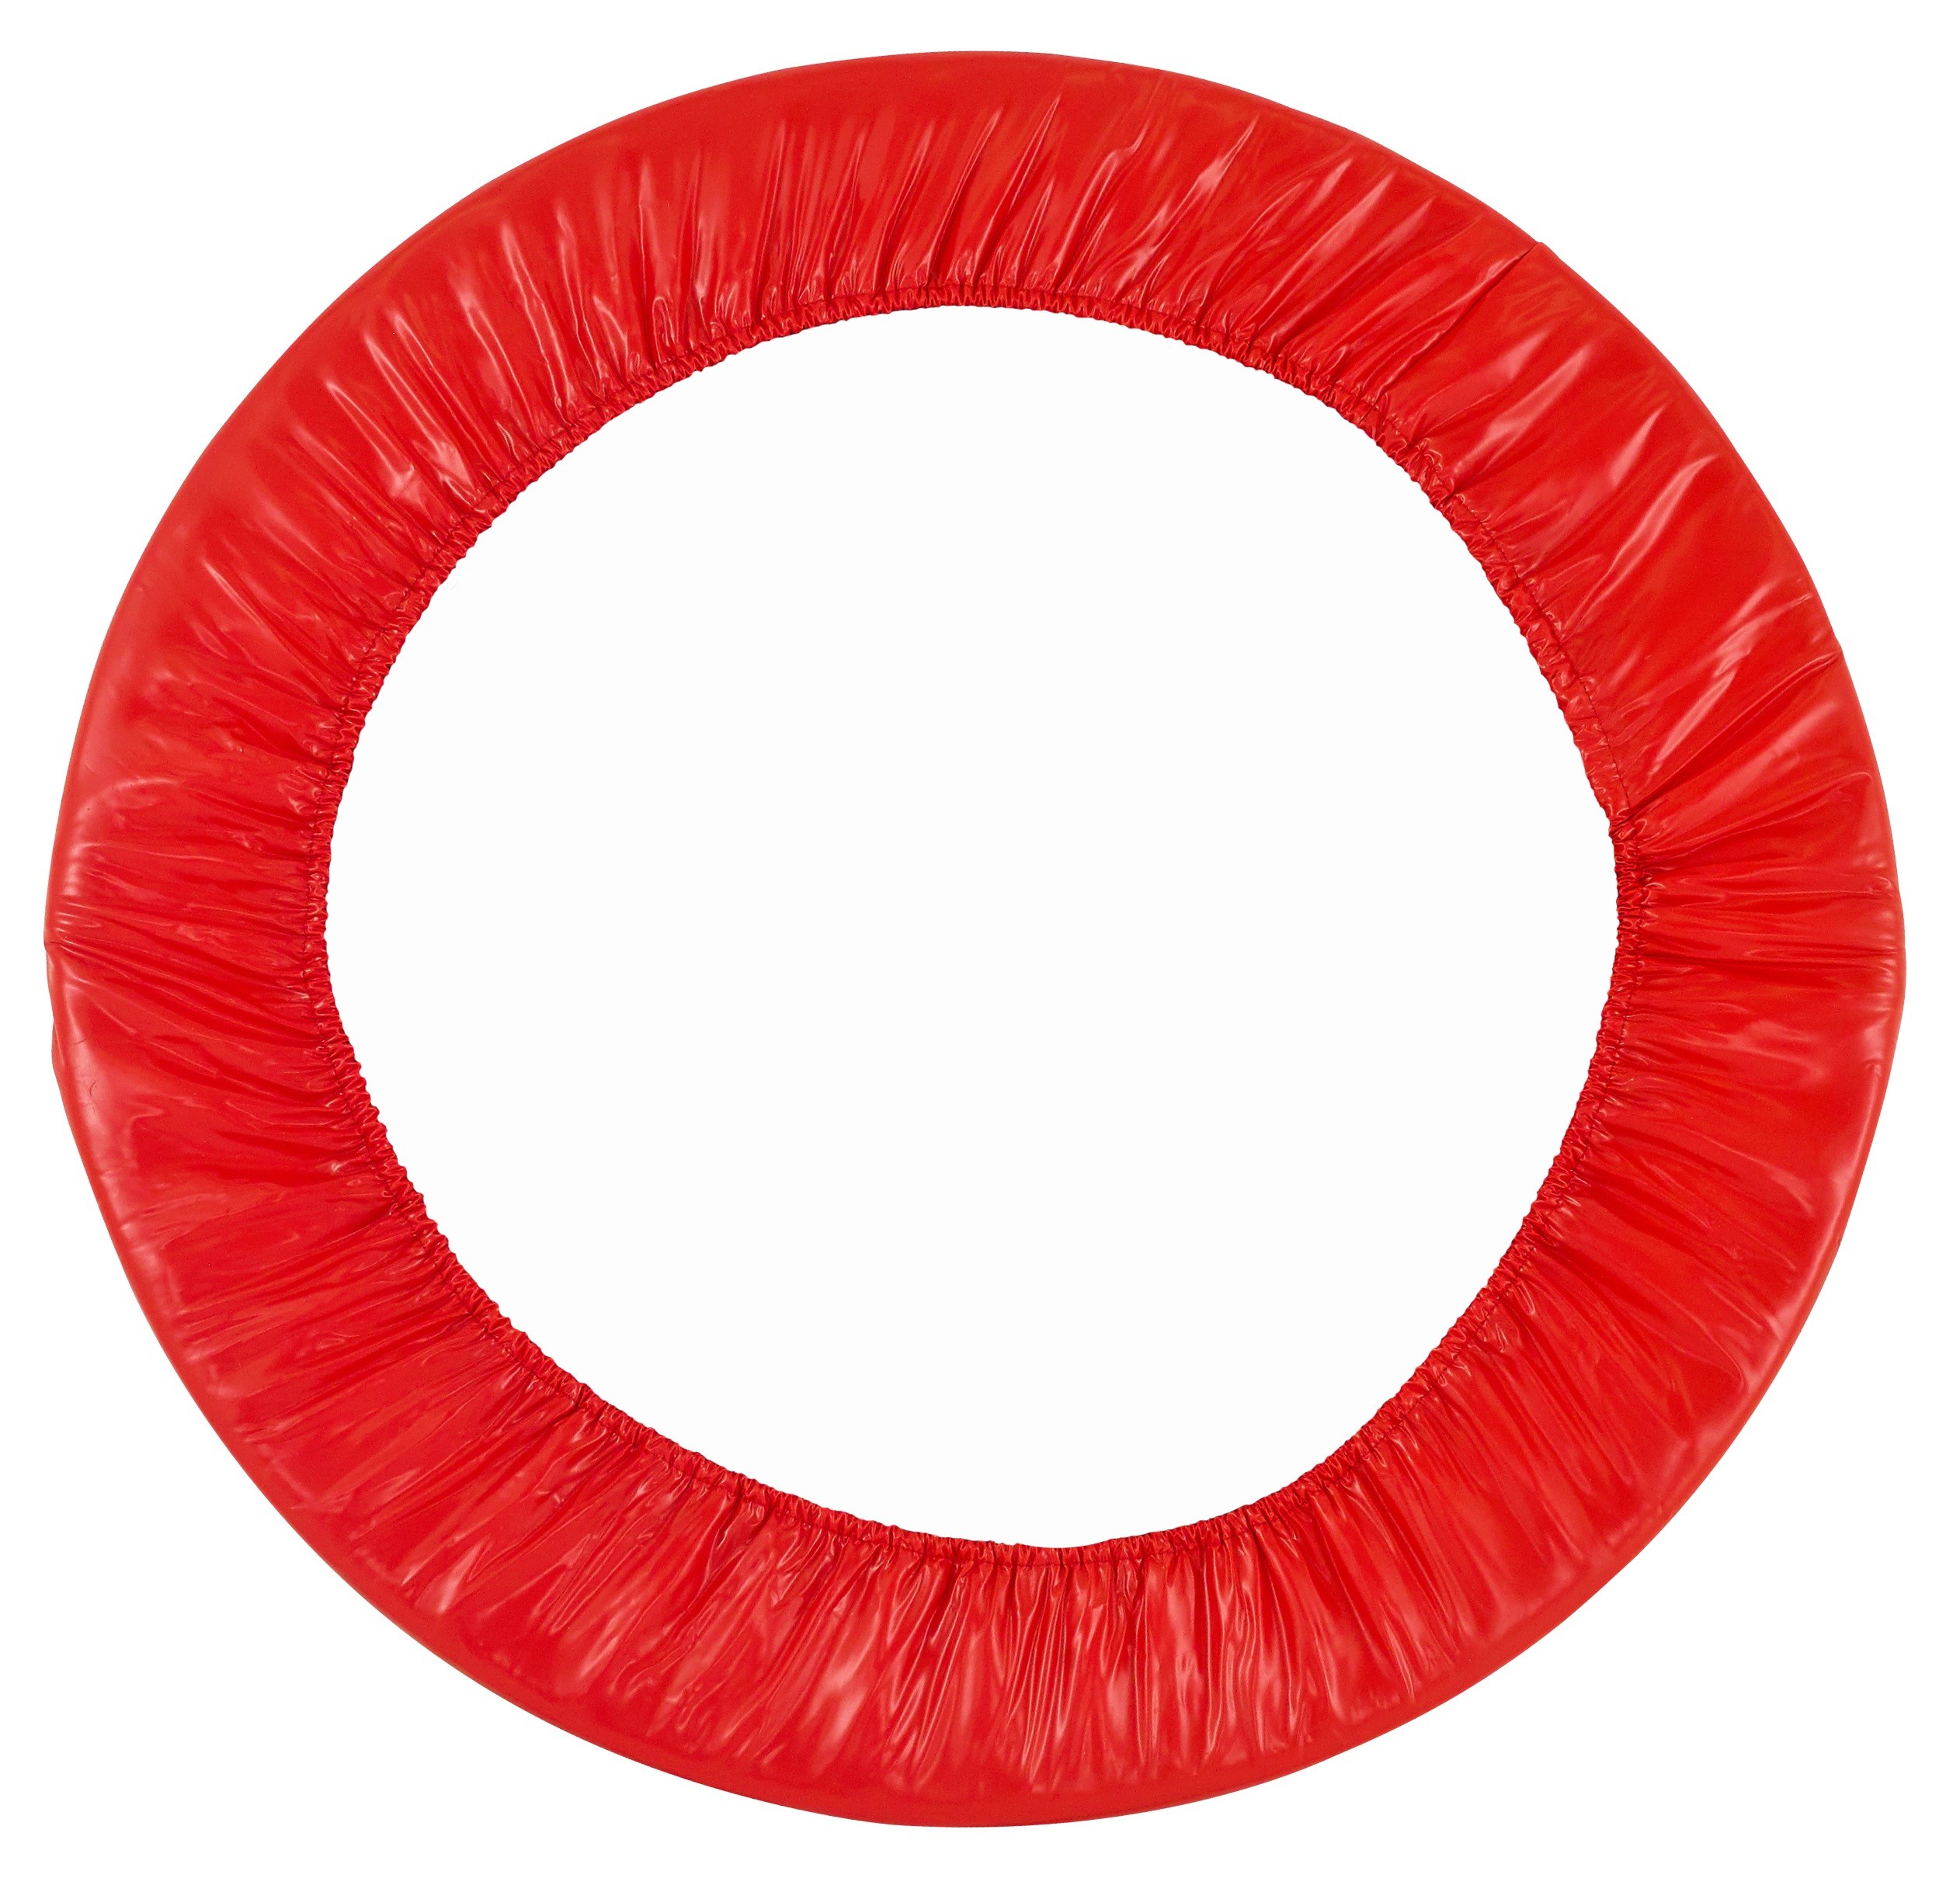 40" Mini Round Trampoline Replacement Safety Pad (Spring Cover) for 6 Legs - Red